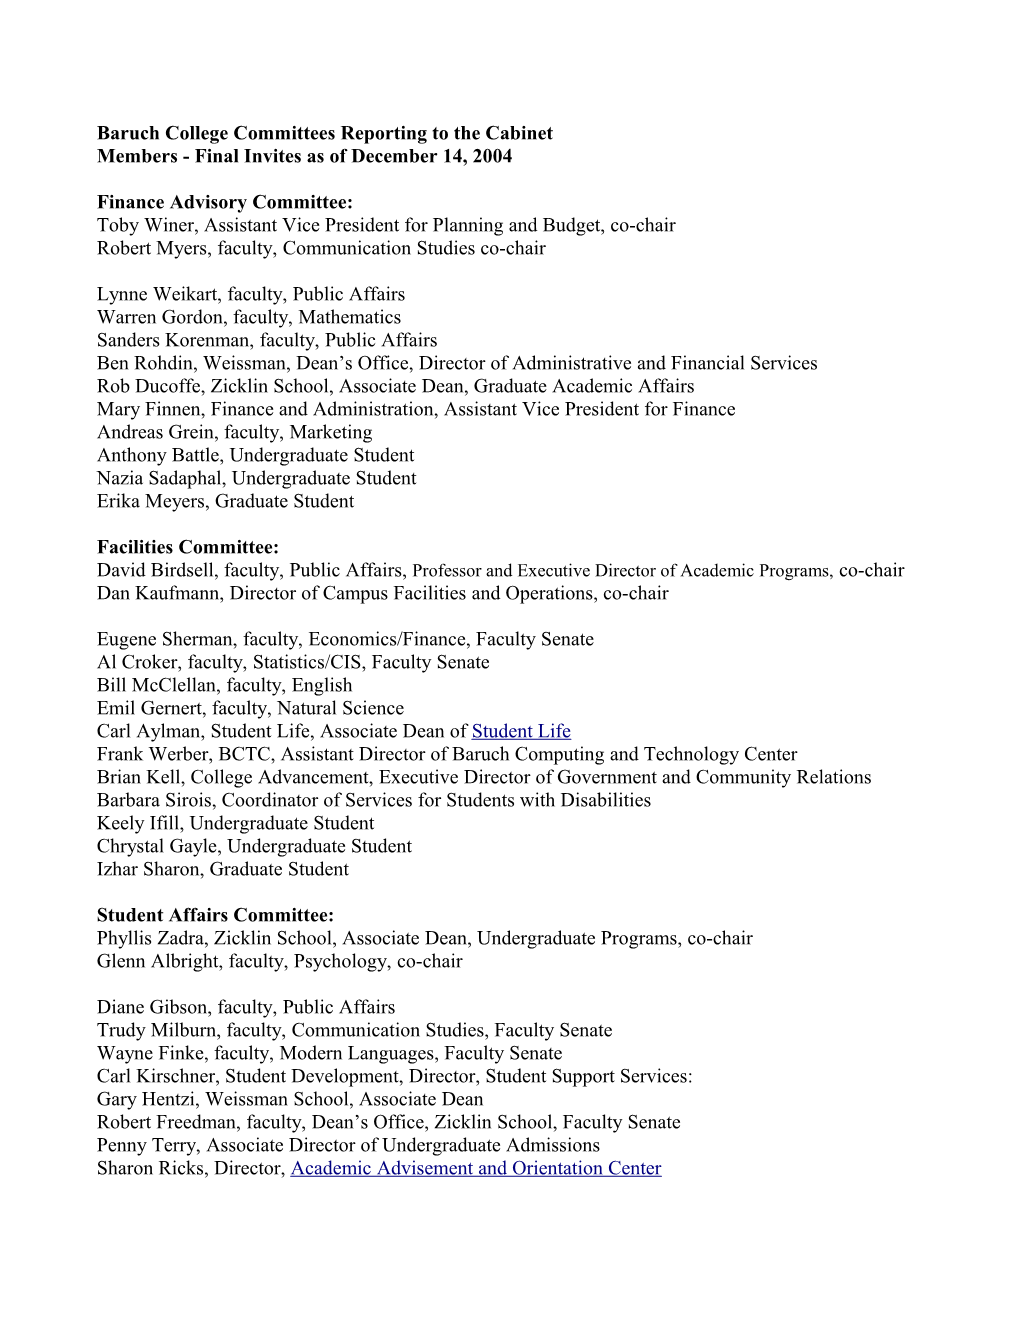 Baruch College Committee Members- Proposed As of November 18, 2004